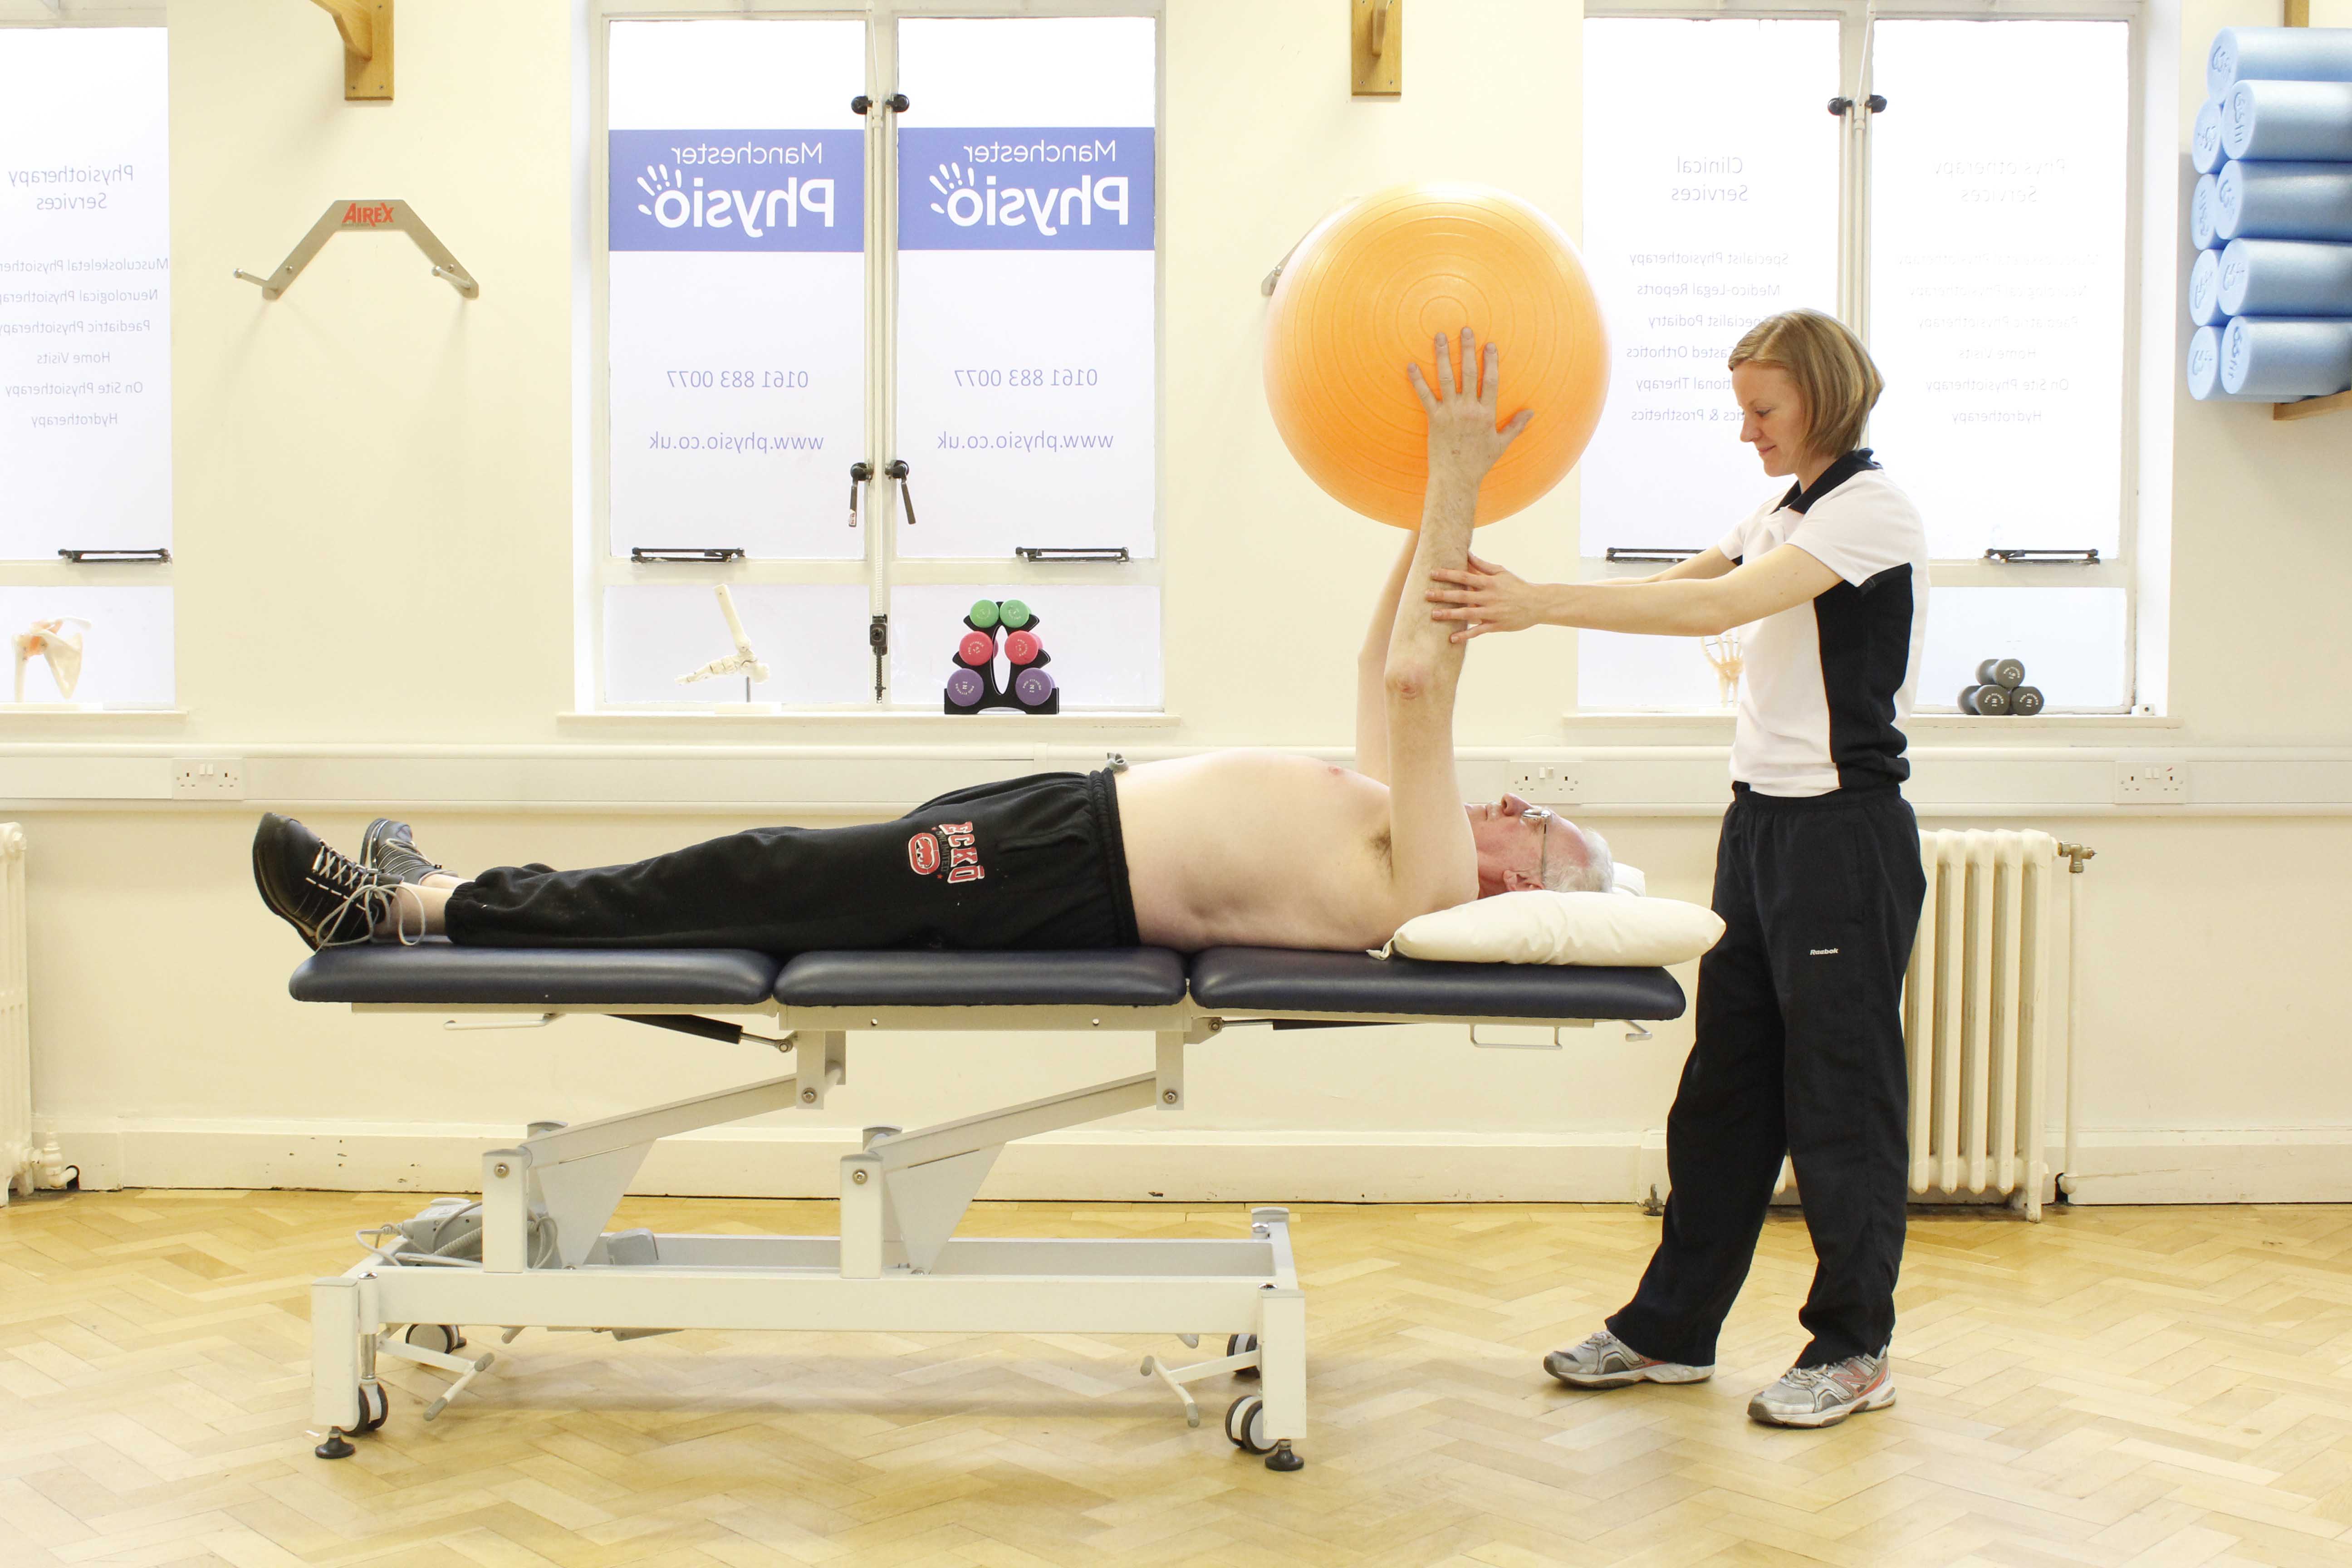 Upper limb mobility exercises using a gym ball assisted by a physiotherapist